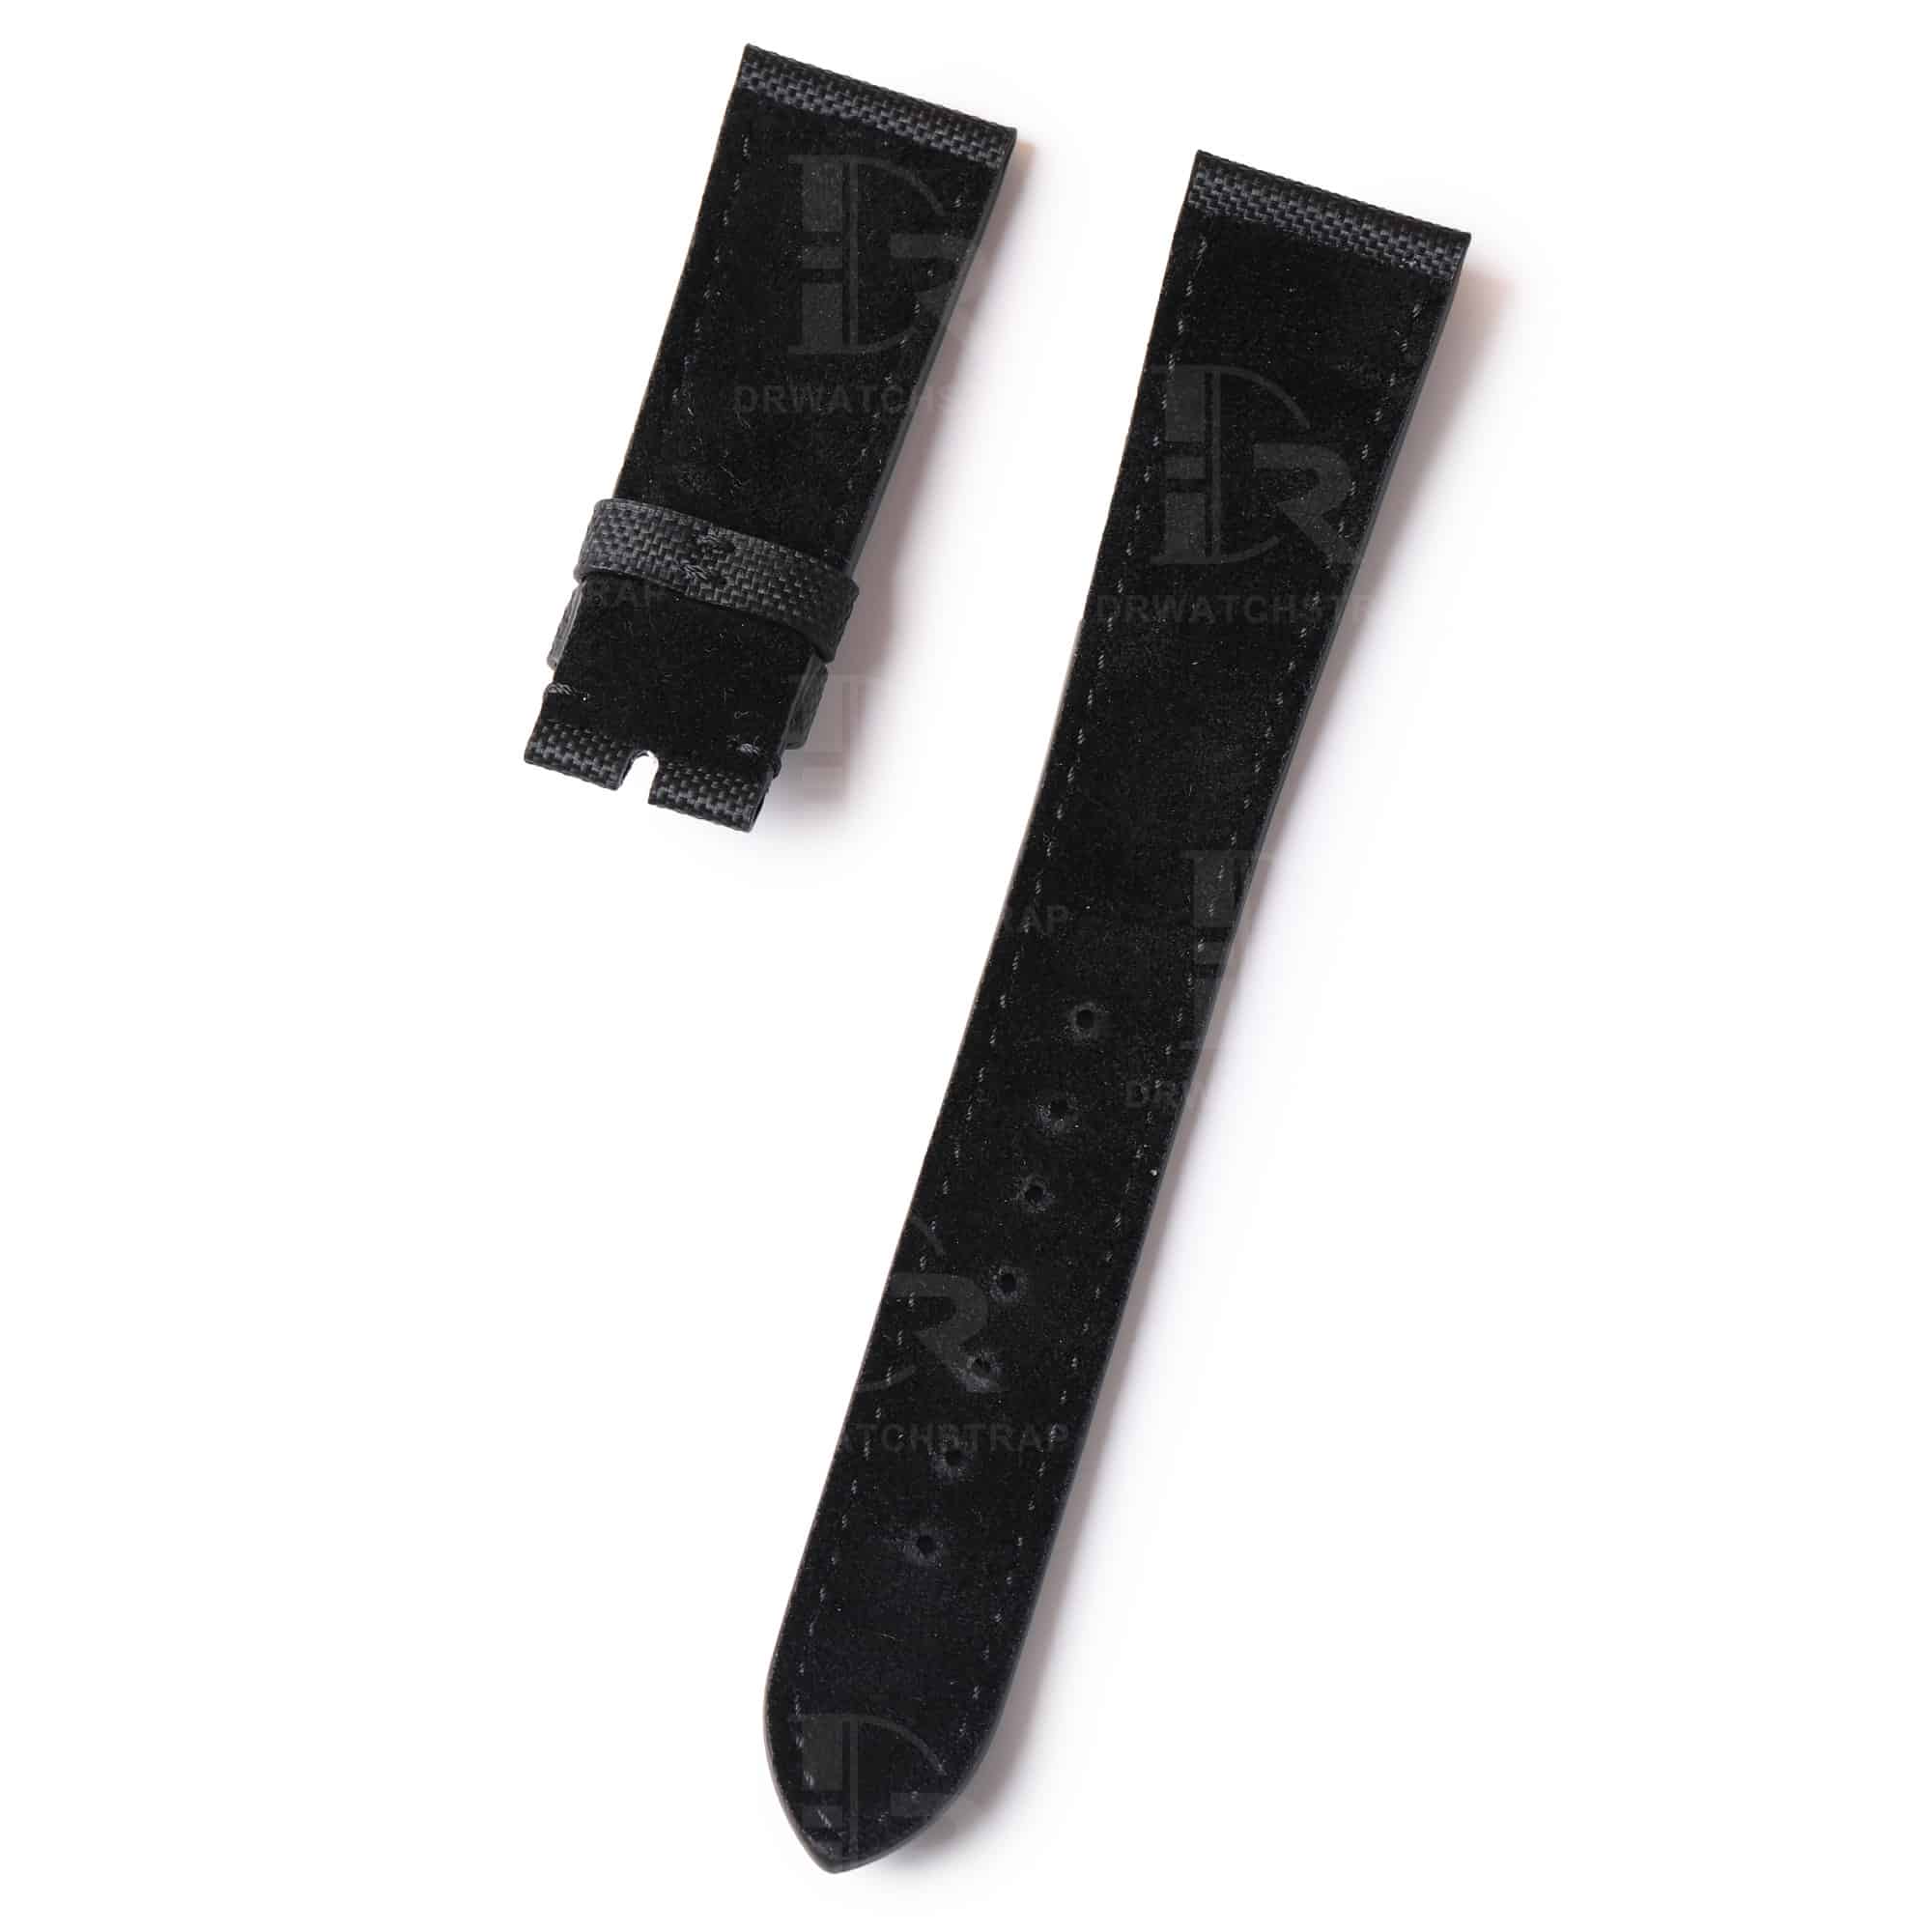 Custom aftermarket best quality nylon fabric canvas material replacement Tudor watch strap and watch band for Tudor Heritage Black Bay 58 41 watches - Shop the high-end nylon watch bands and strap online at a low price